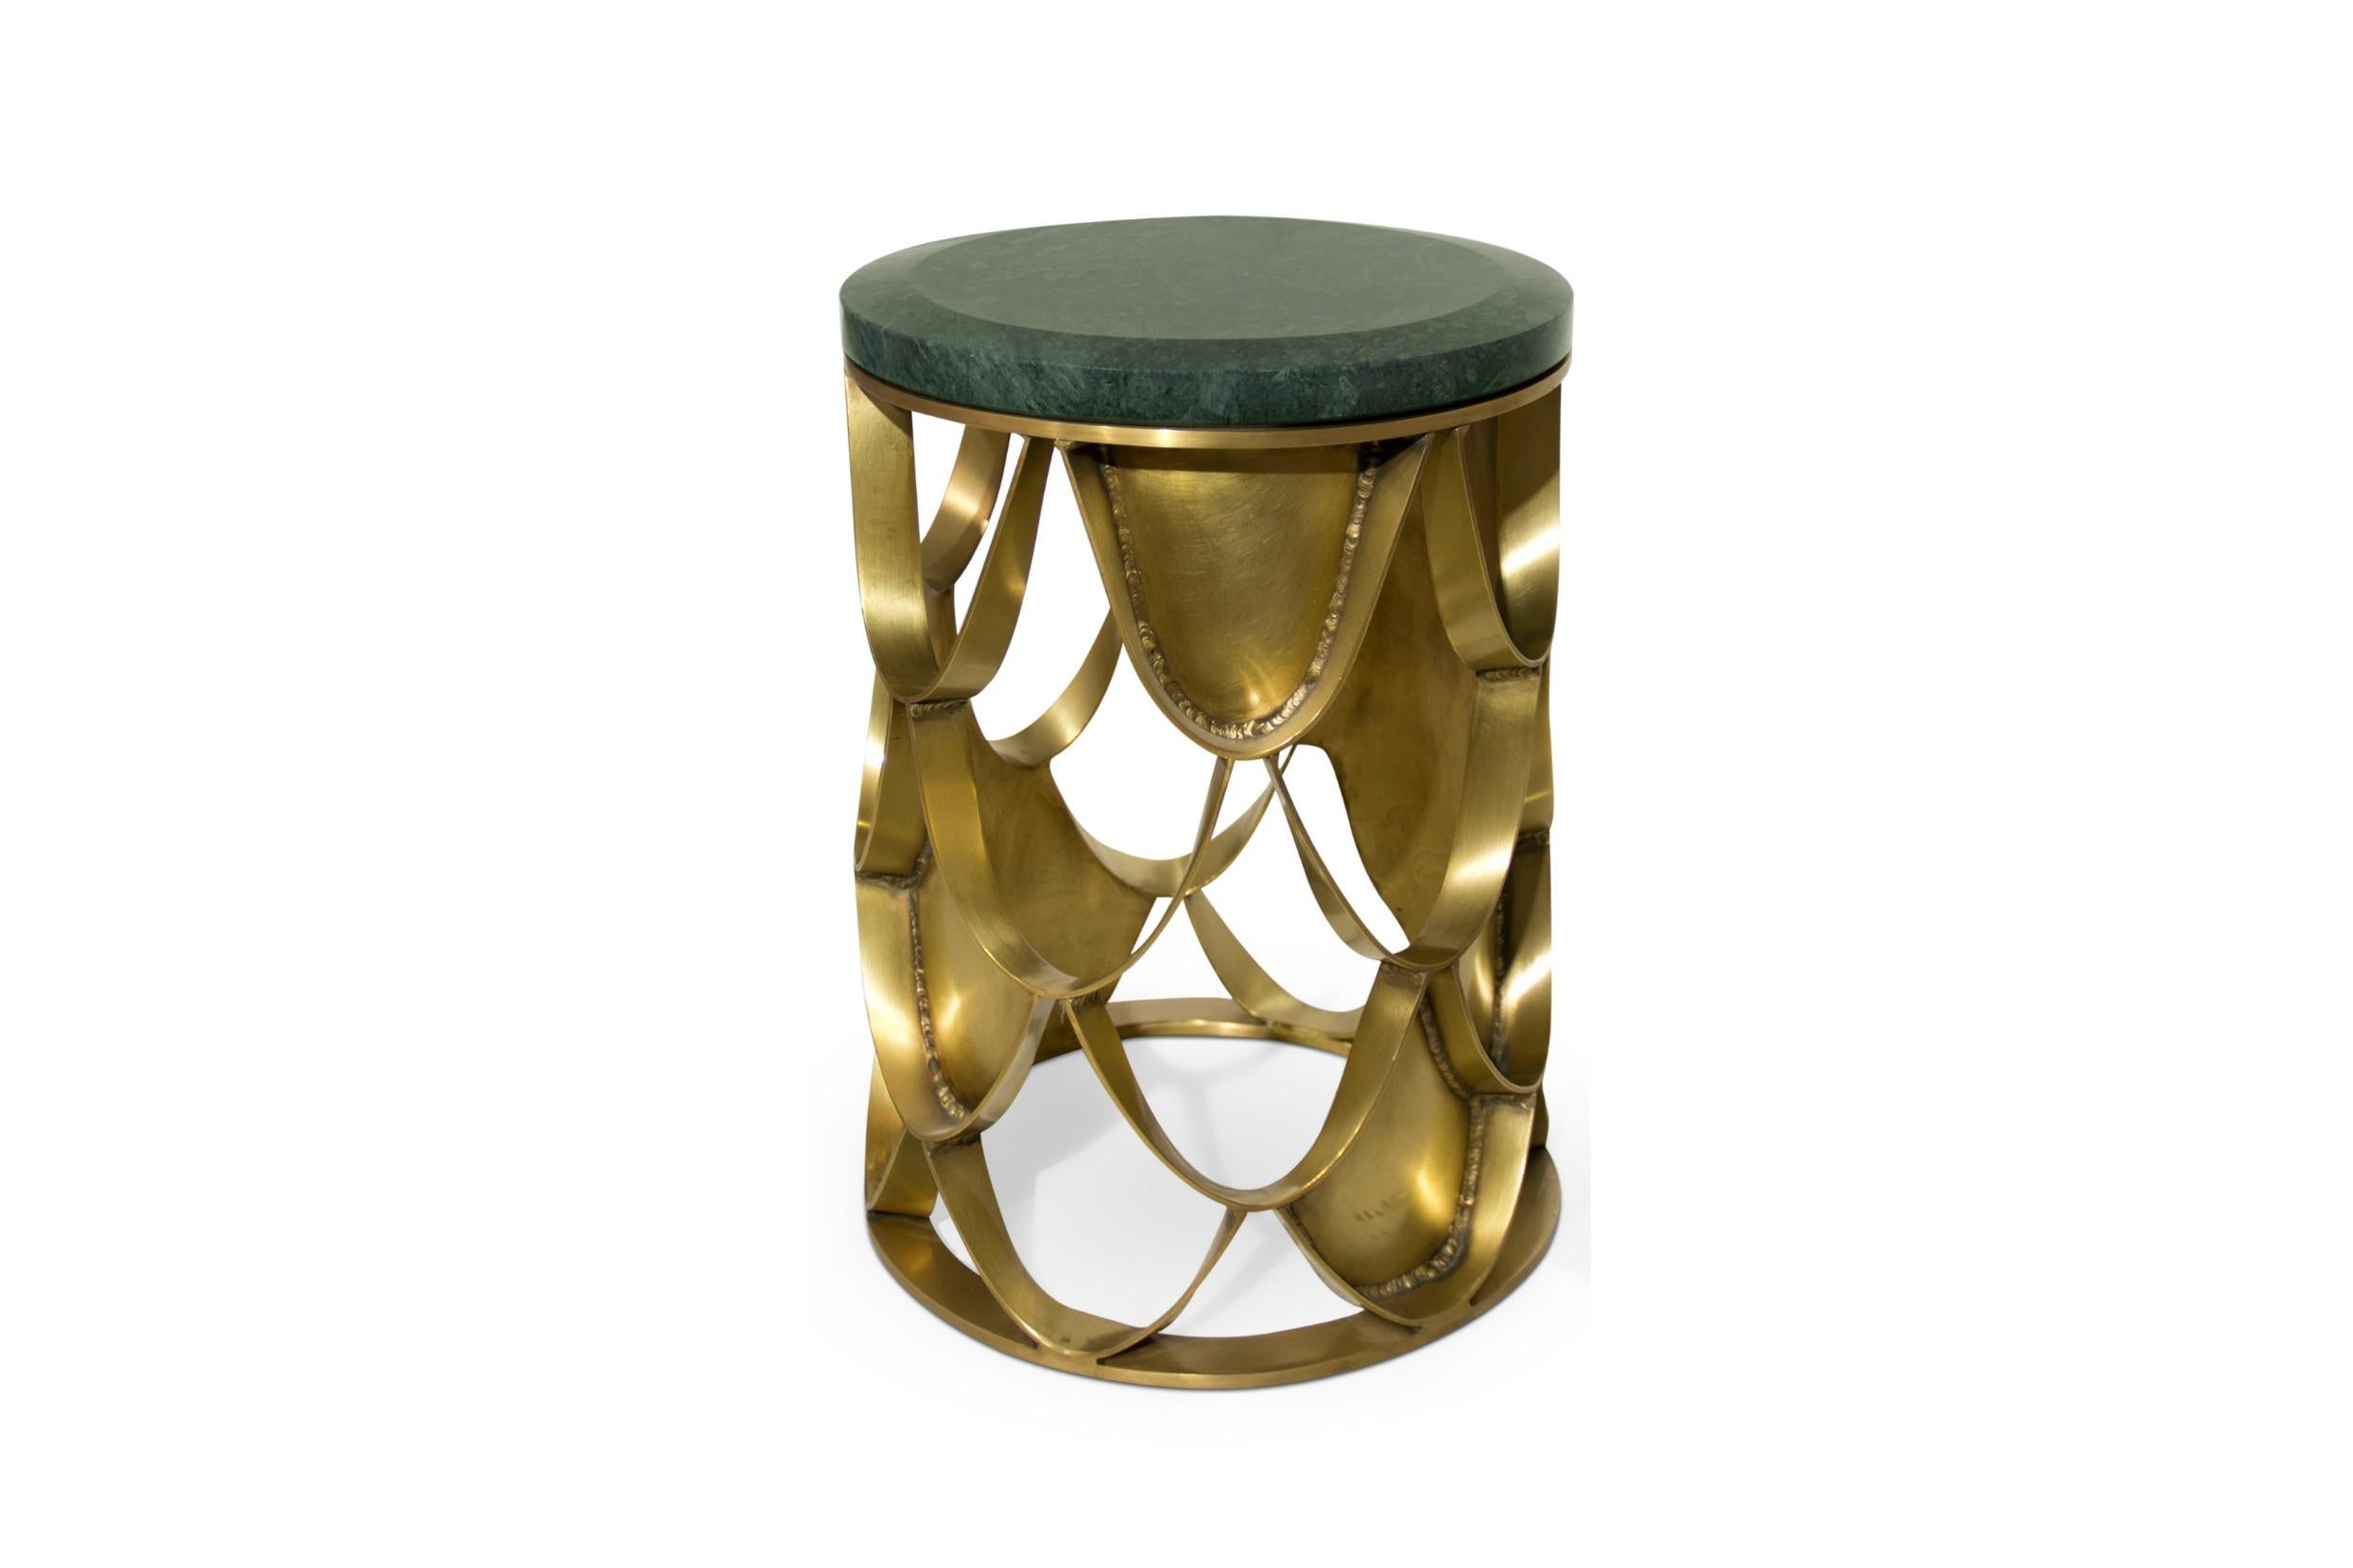 Art Deco Koi Side Table in Brass with Green Marble Top by Brabbu For Sale